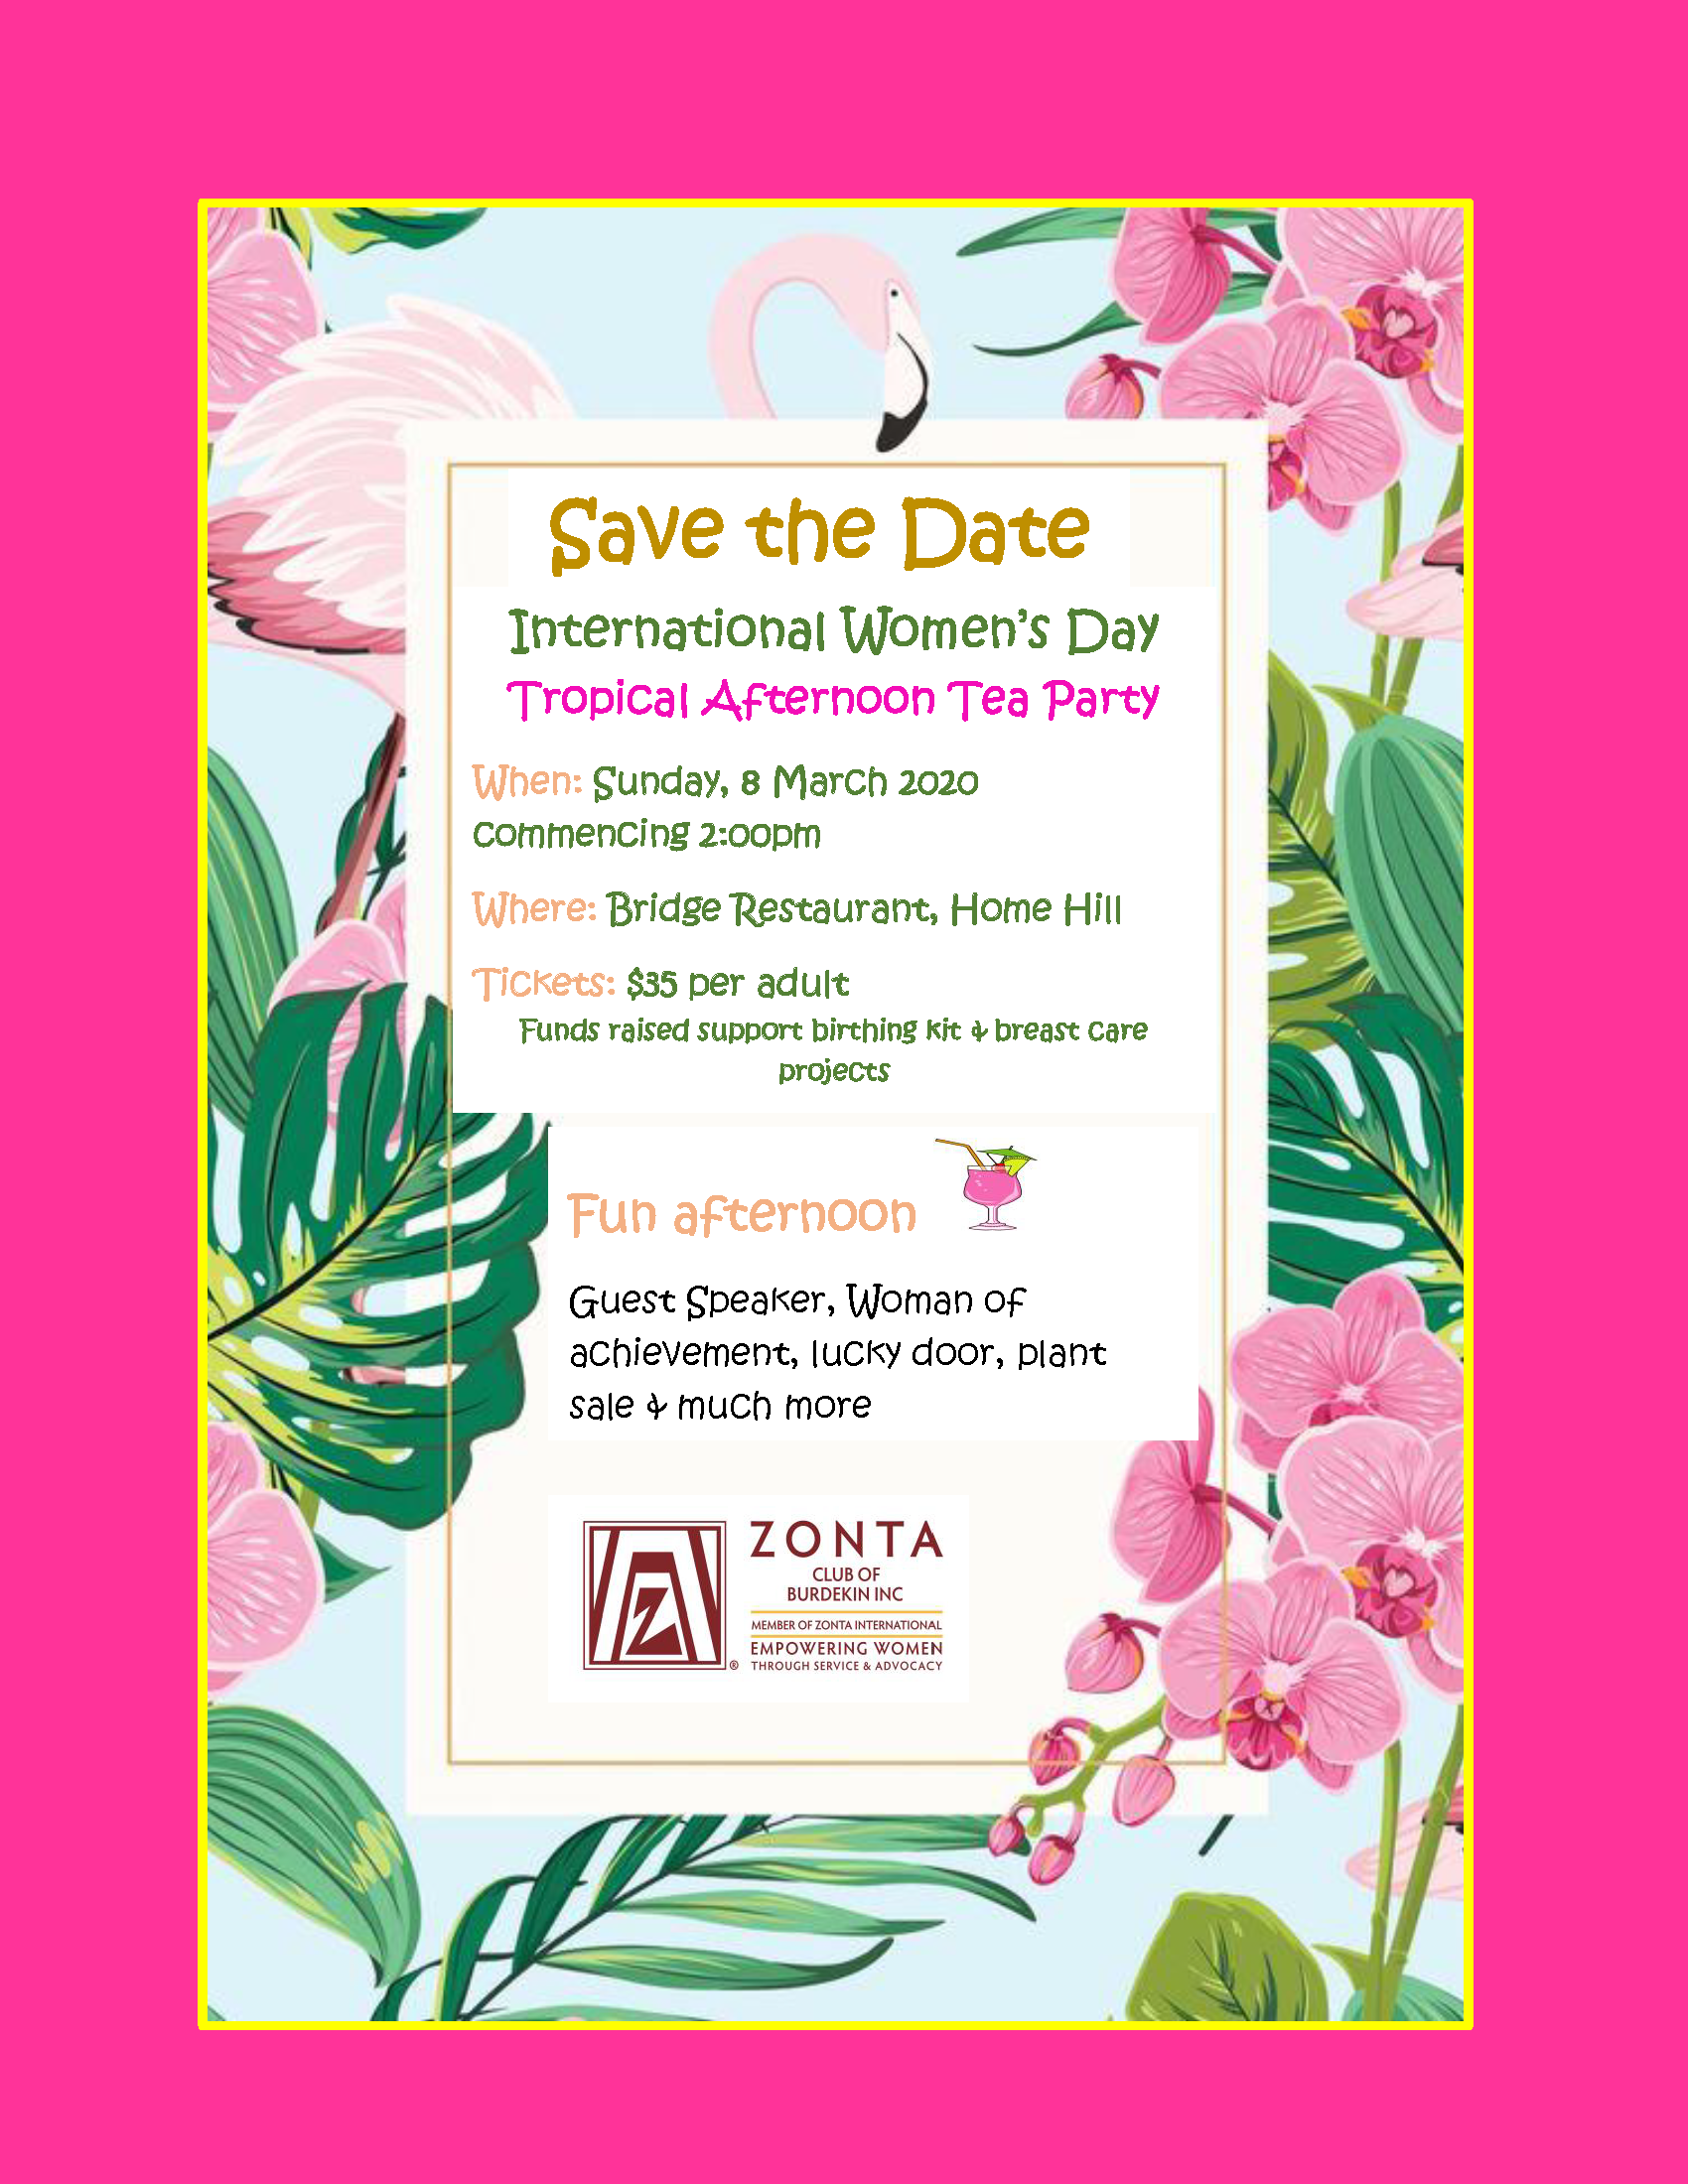 Image of Zonta Club Save the Date